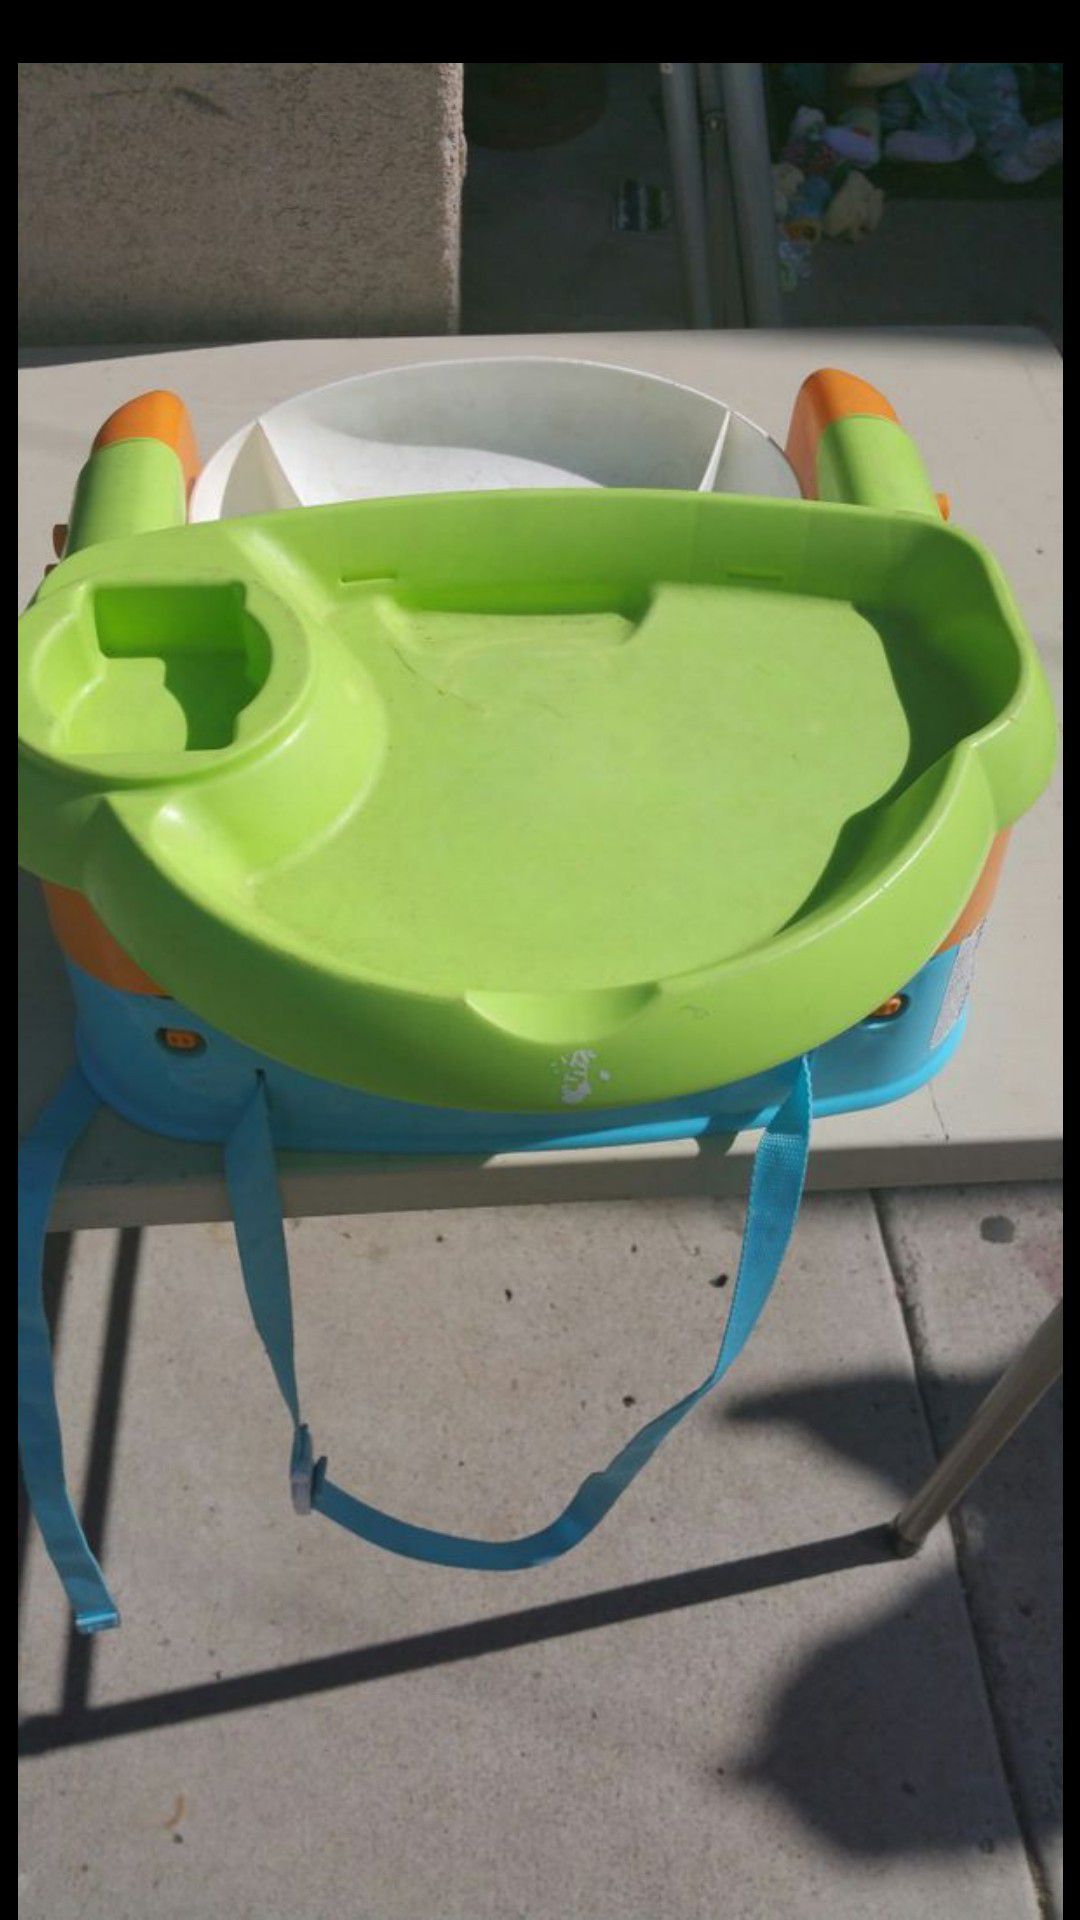 Booster seat $10